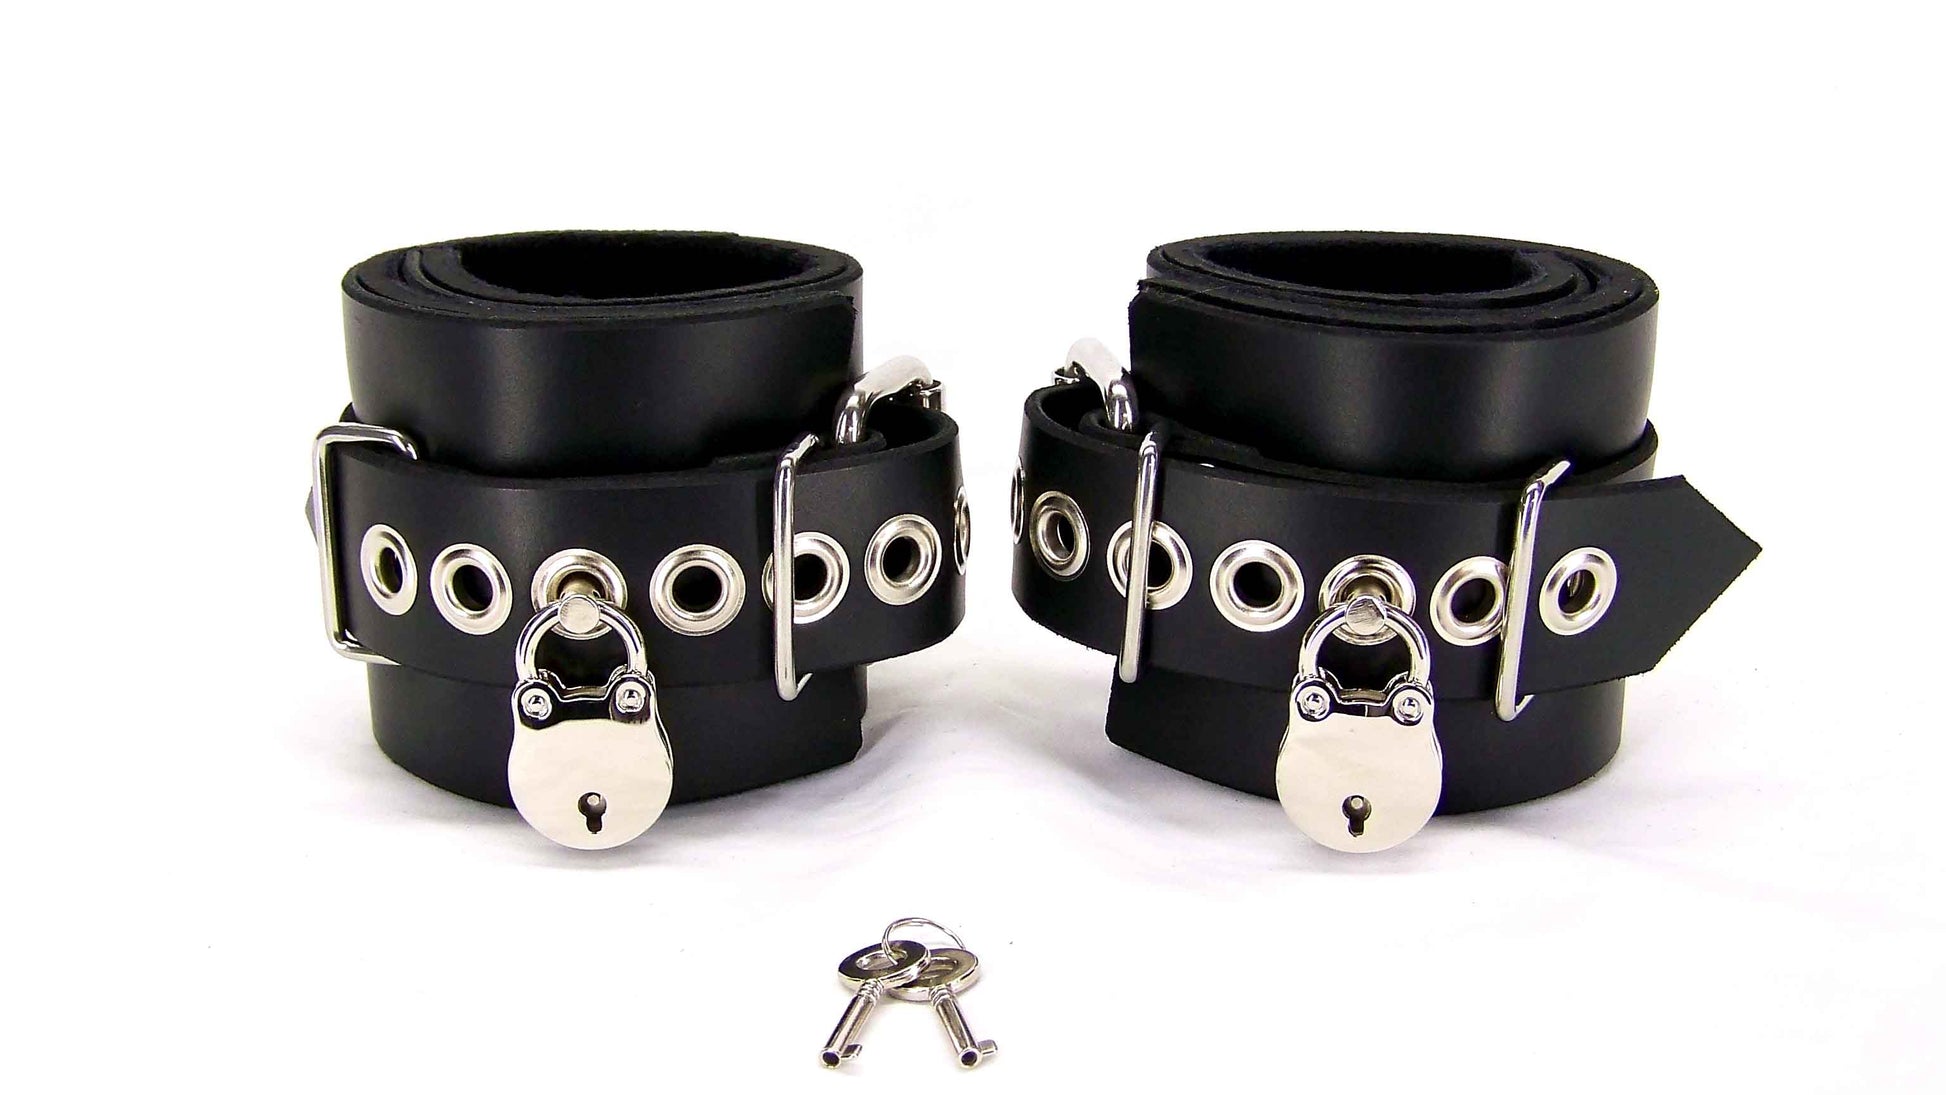 Black neoprene lined bondage cuffs with tentacle eyelets and lock closure against white background.